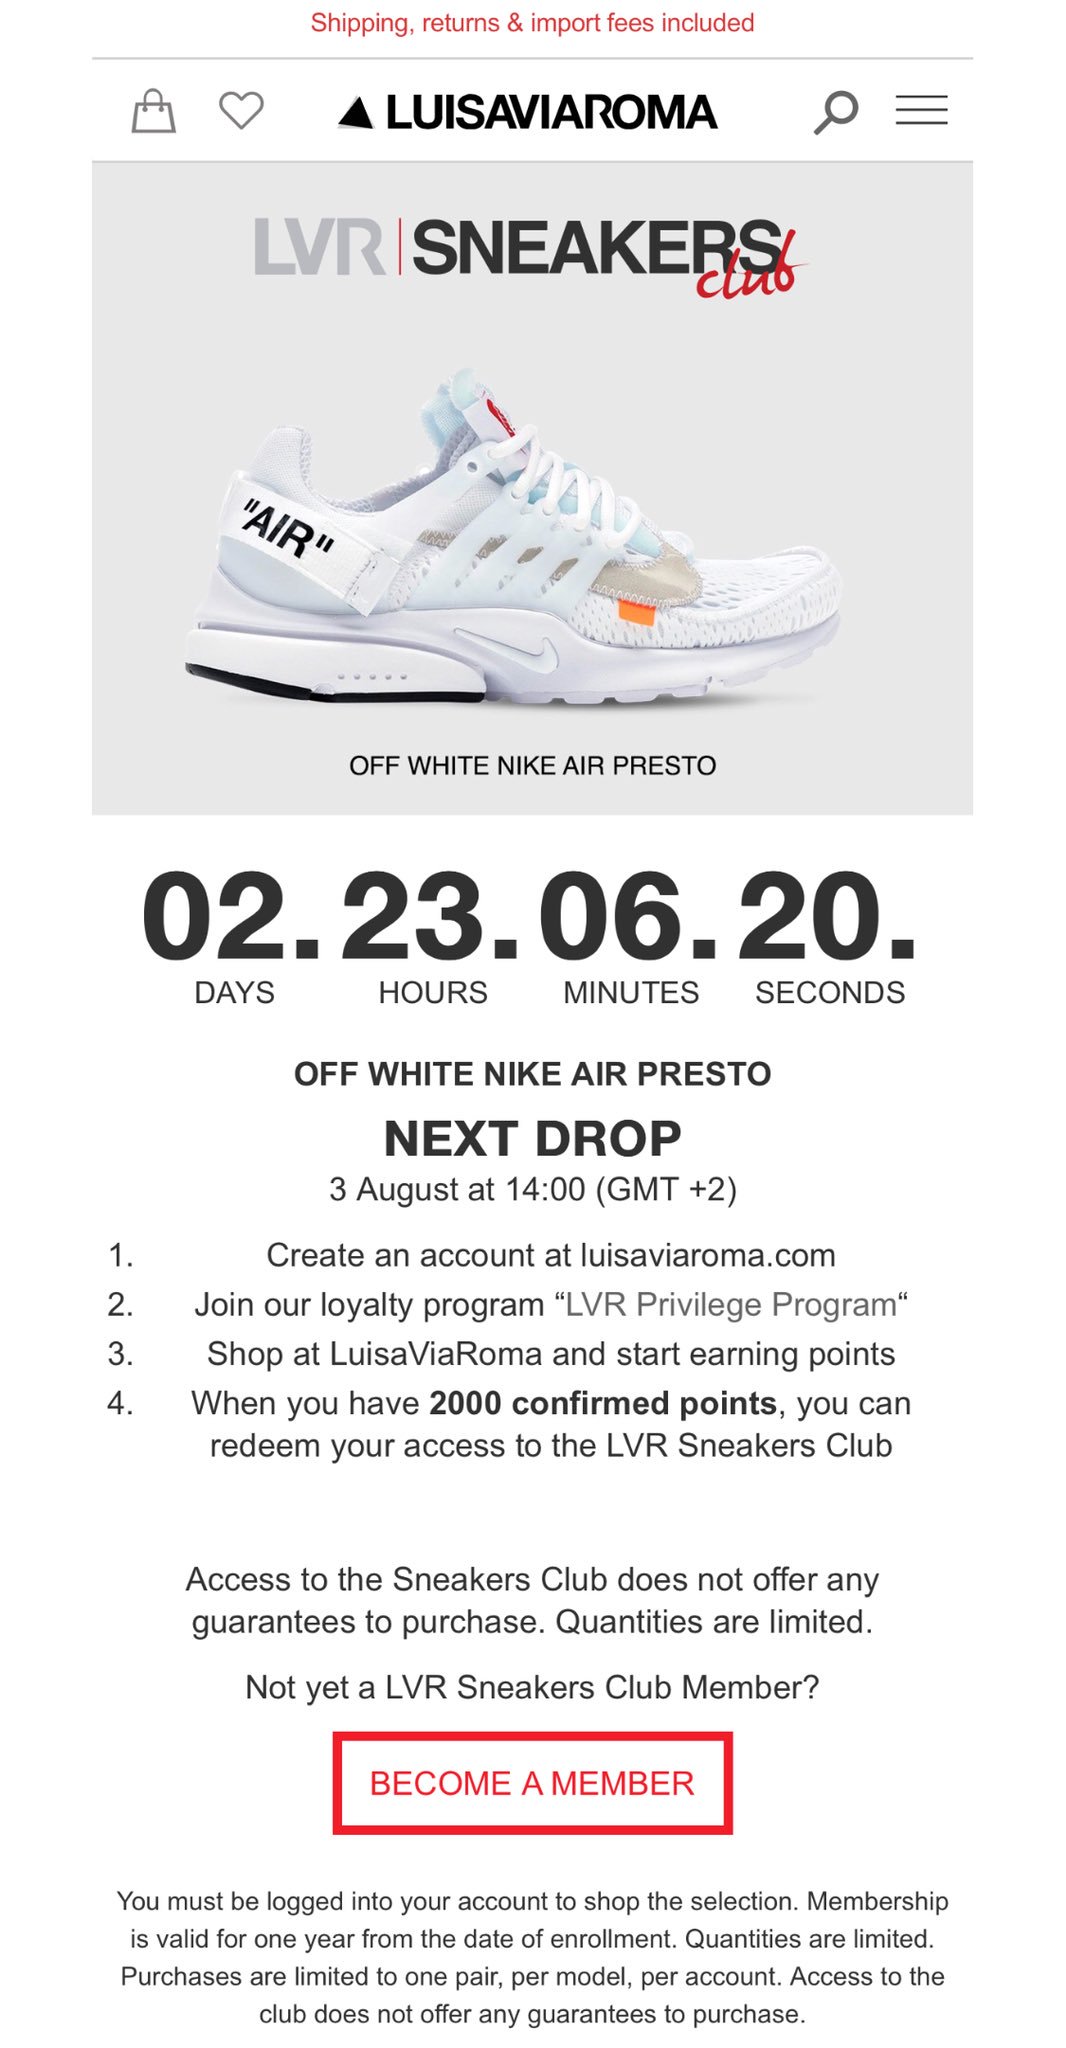 SNKR_TWITR on Twitter: "Off-White x Nike Air Presto “White” drop on Luisaviaroma all LVR Sneakers Club members. Global shipping https://t.co/Lz72ytdlr3 #snkr_twitr https://t.co/ctY5VEo5Fk" / Twitter